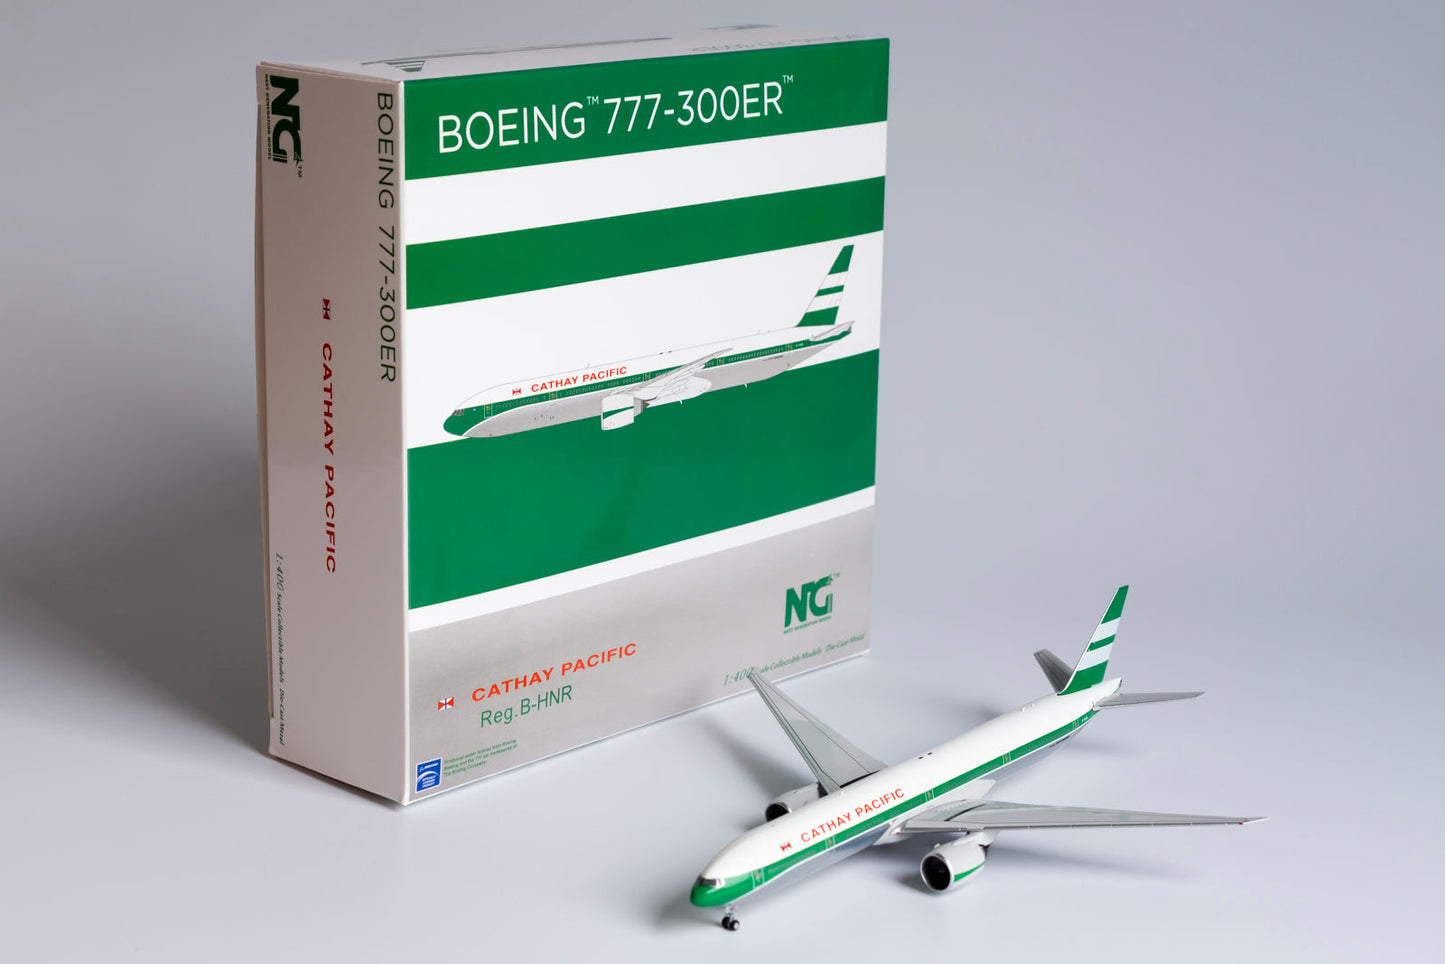 1/400 Cathay Pacific B 777-300ER "Fantasy Retro Livery" NG Models 73001s/d2 *Defective model*